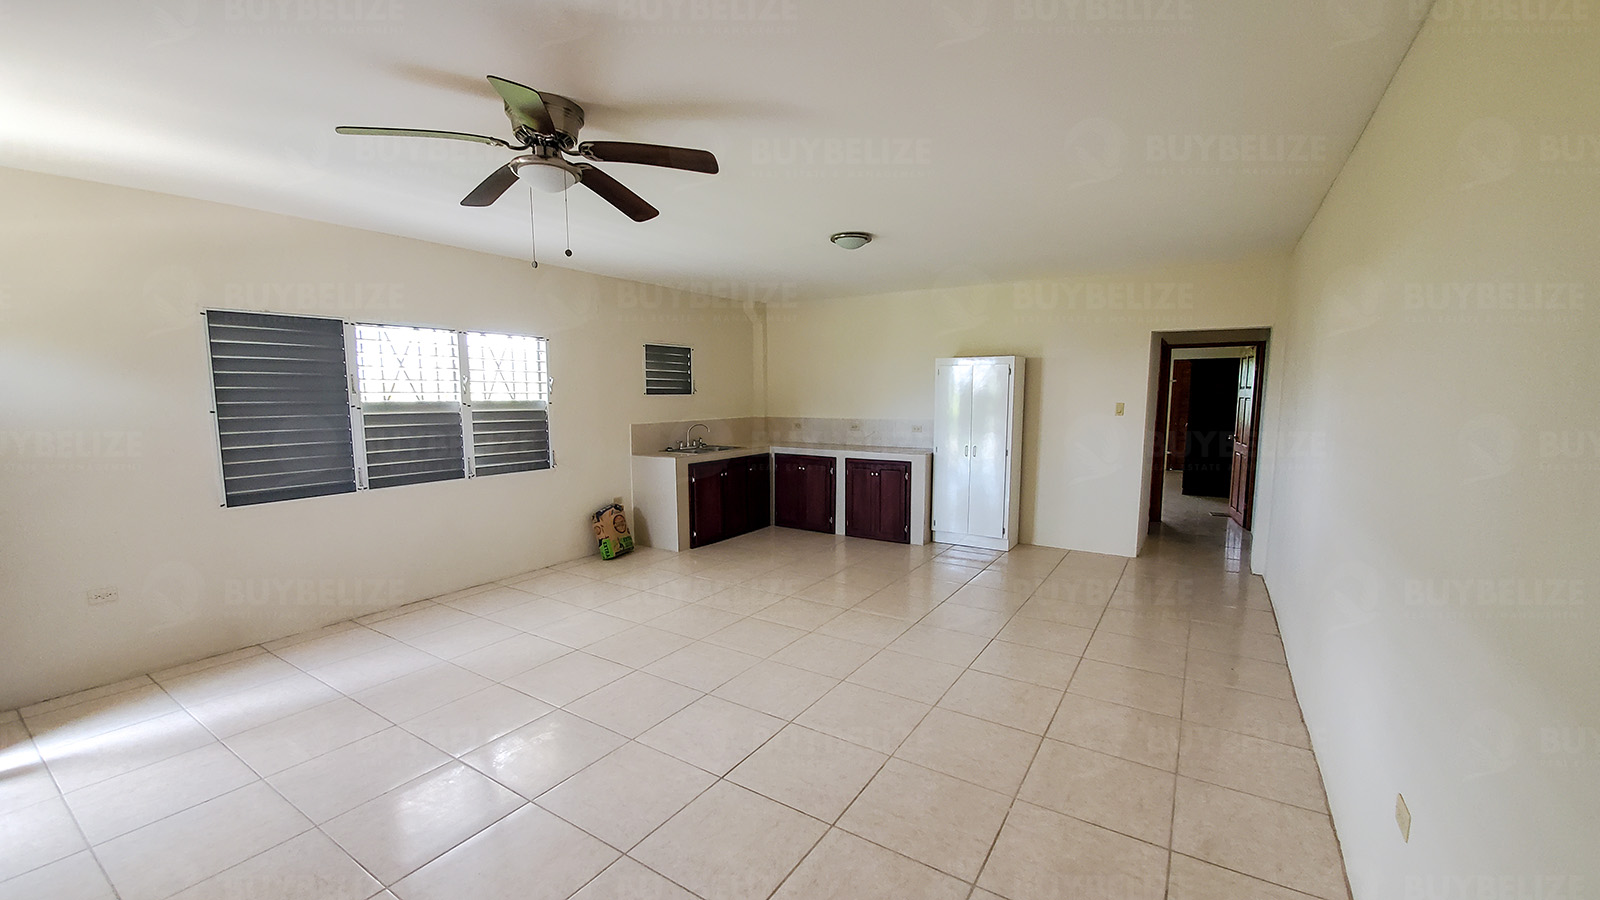 1 Bed 1 Bath Apartment for rent in Belize City